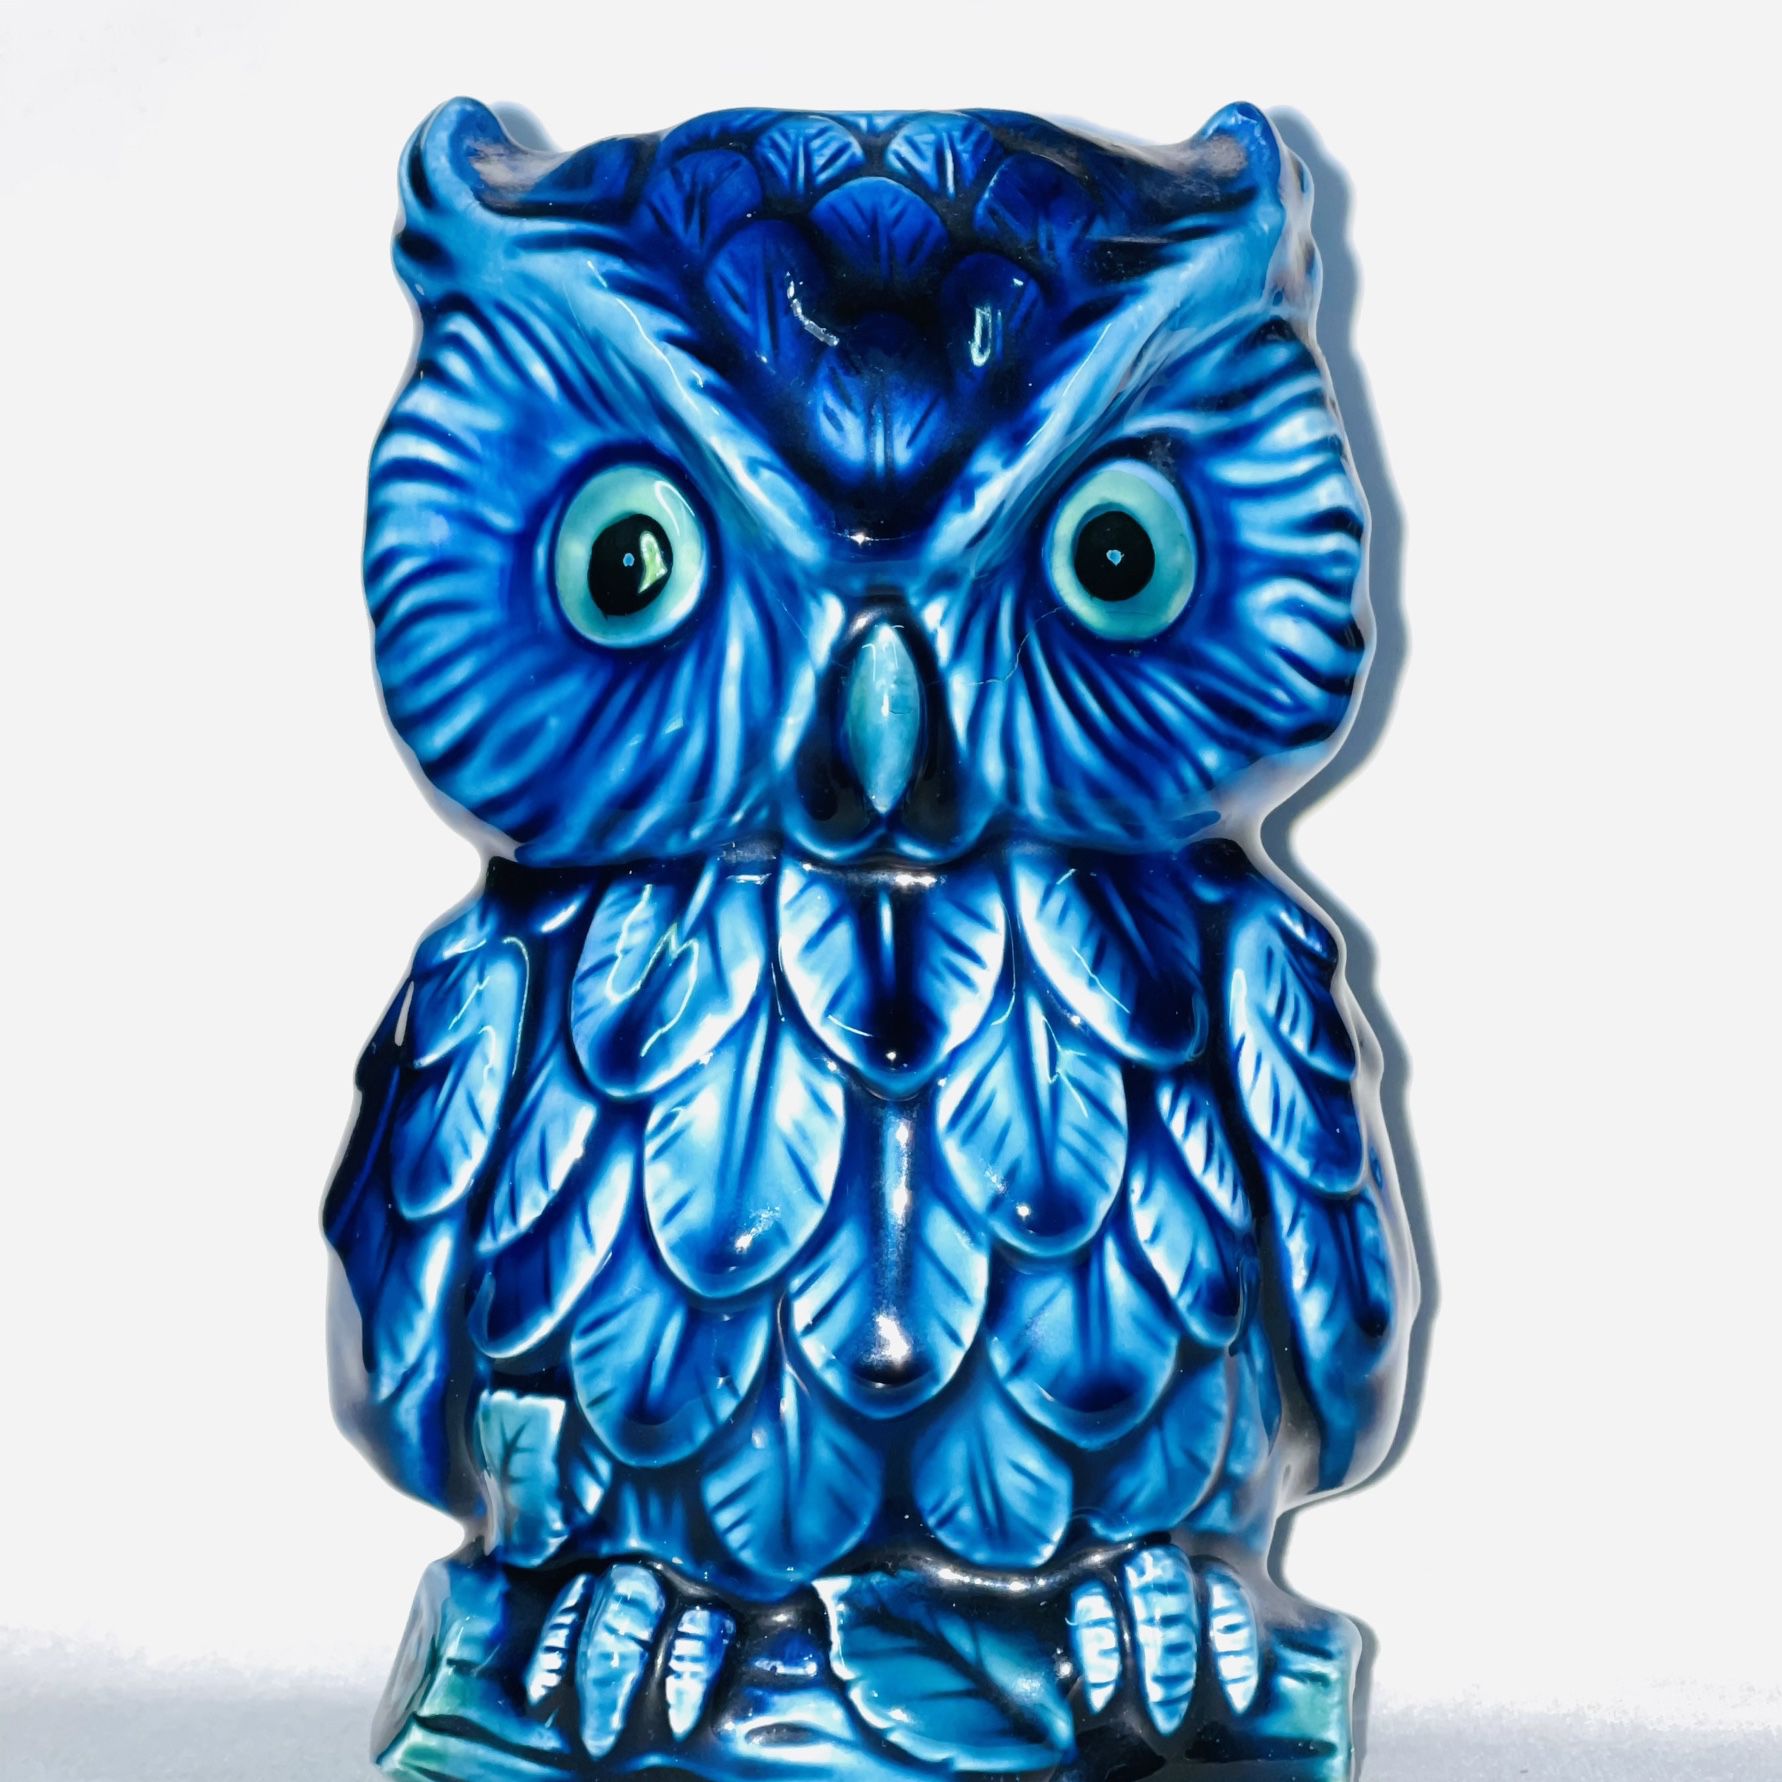 Vintage Ceramic Owl Candle Holder, Blue From Inarco, Japan